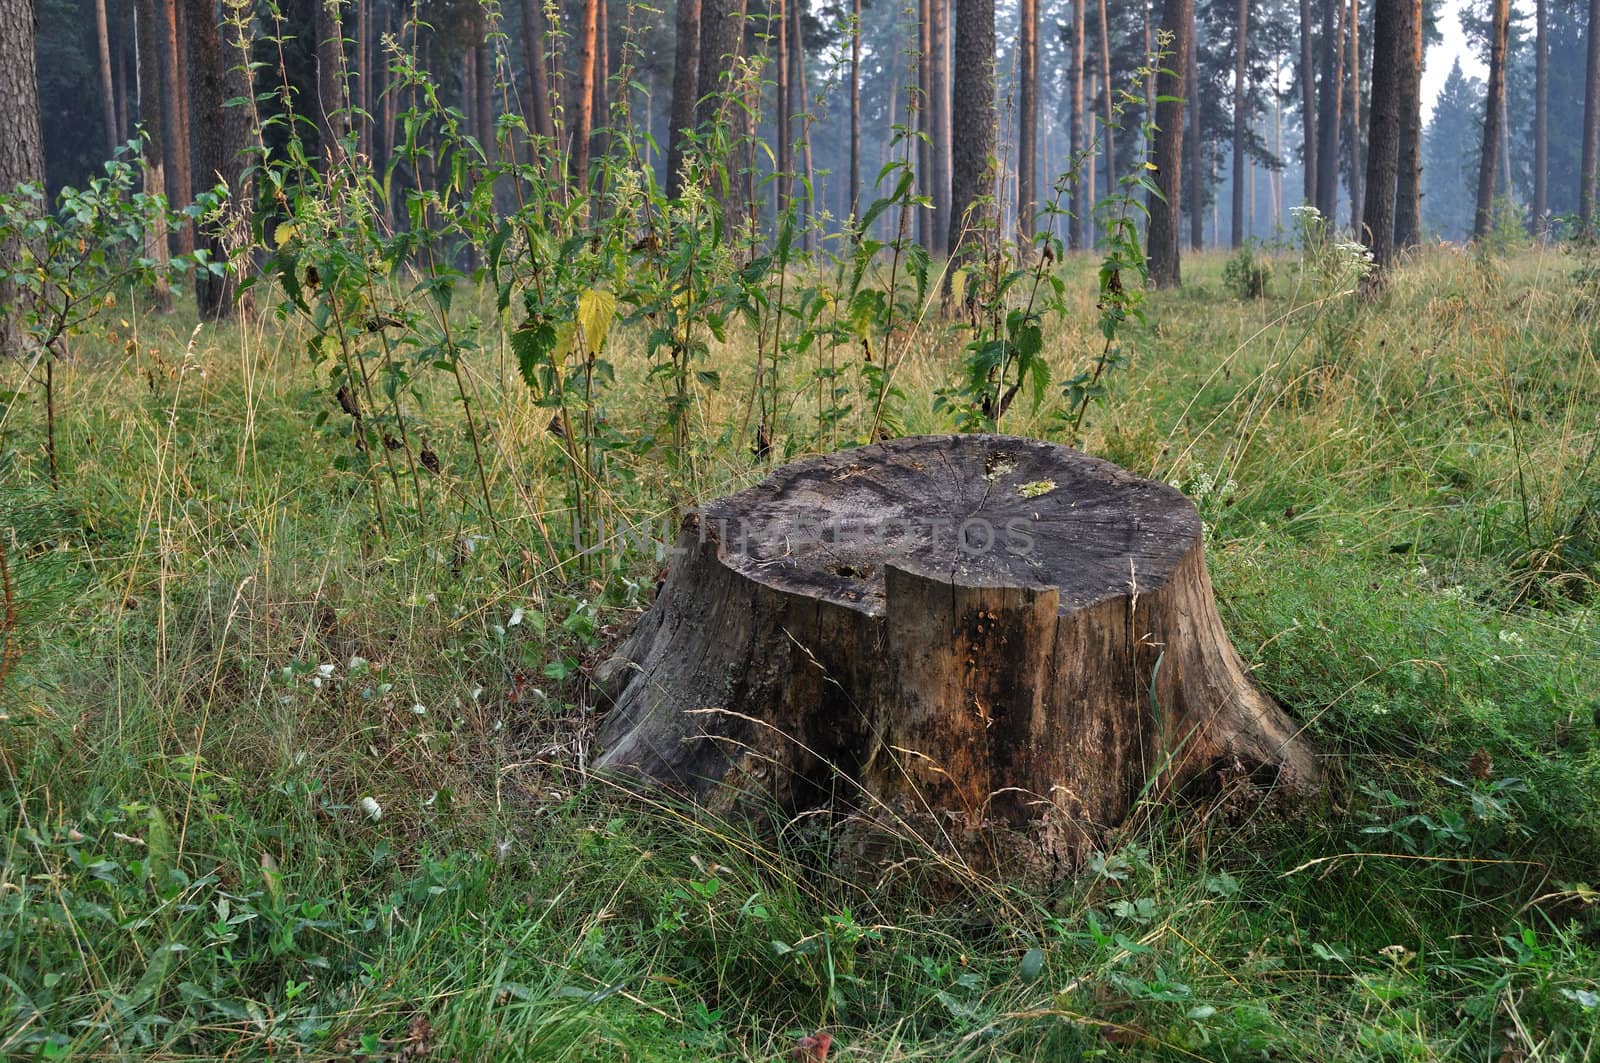 View of smoky forest with old stump on foreground